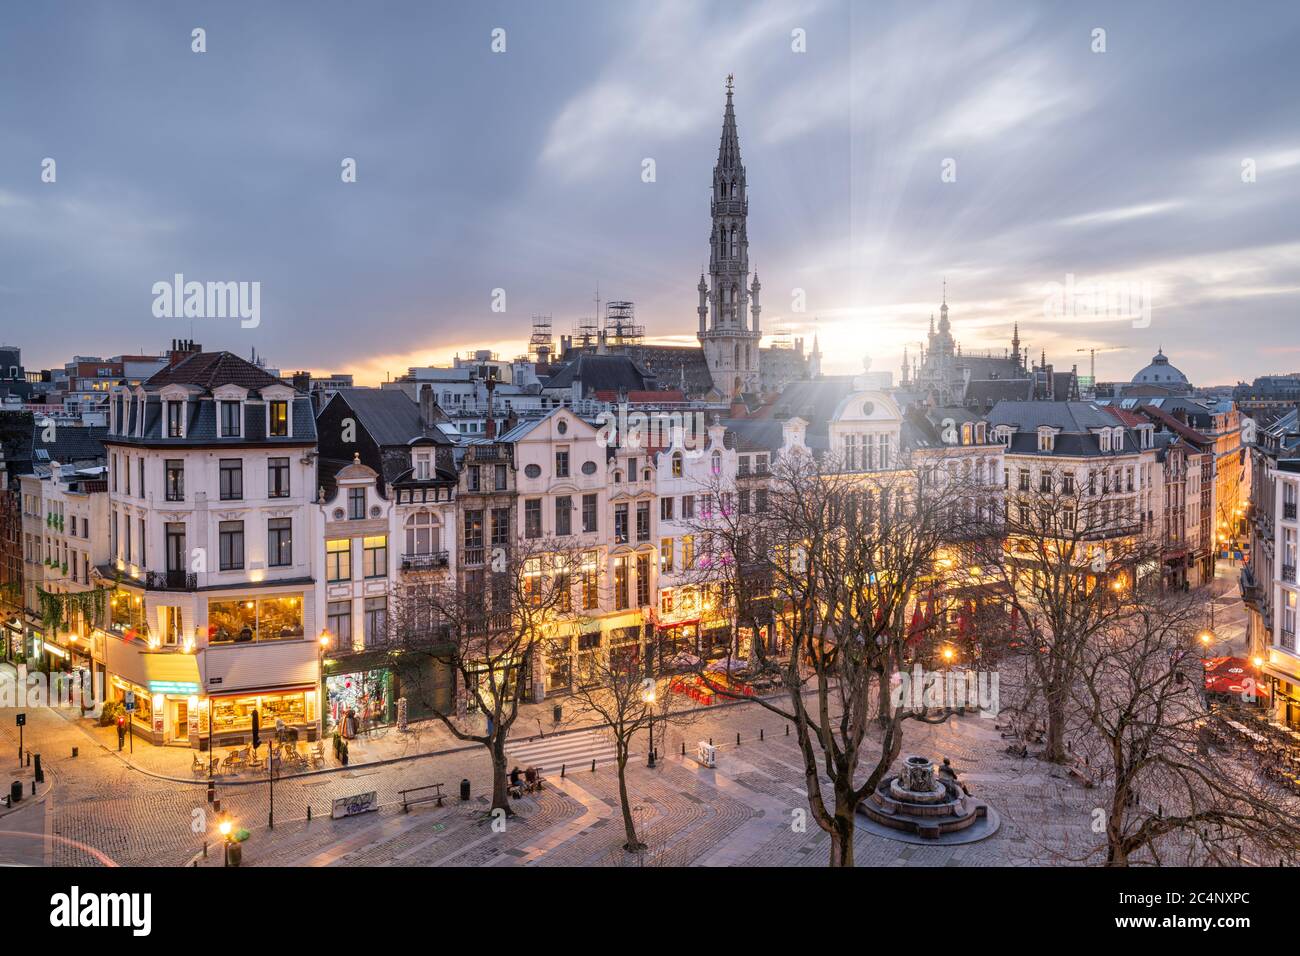 Brussels, Belgium plaza and skyline with the Town Hall tower at dusk. Stock Photo